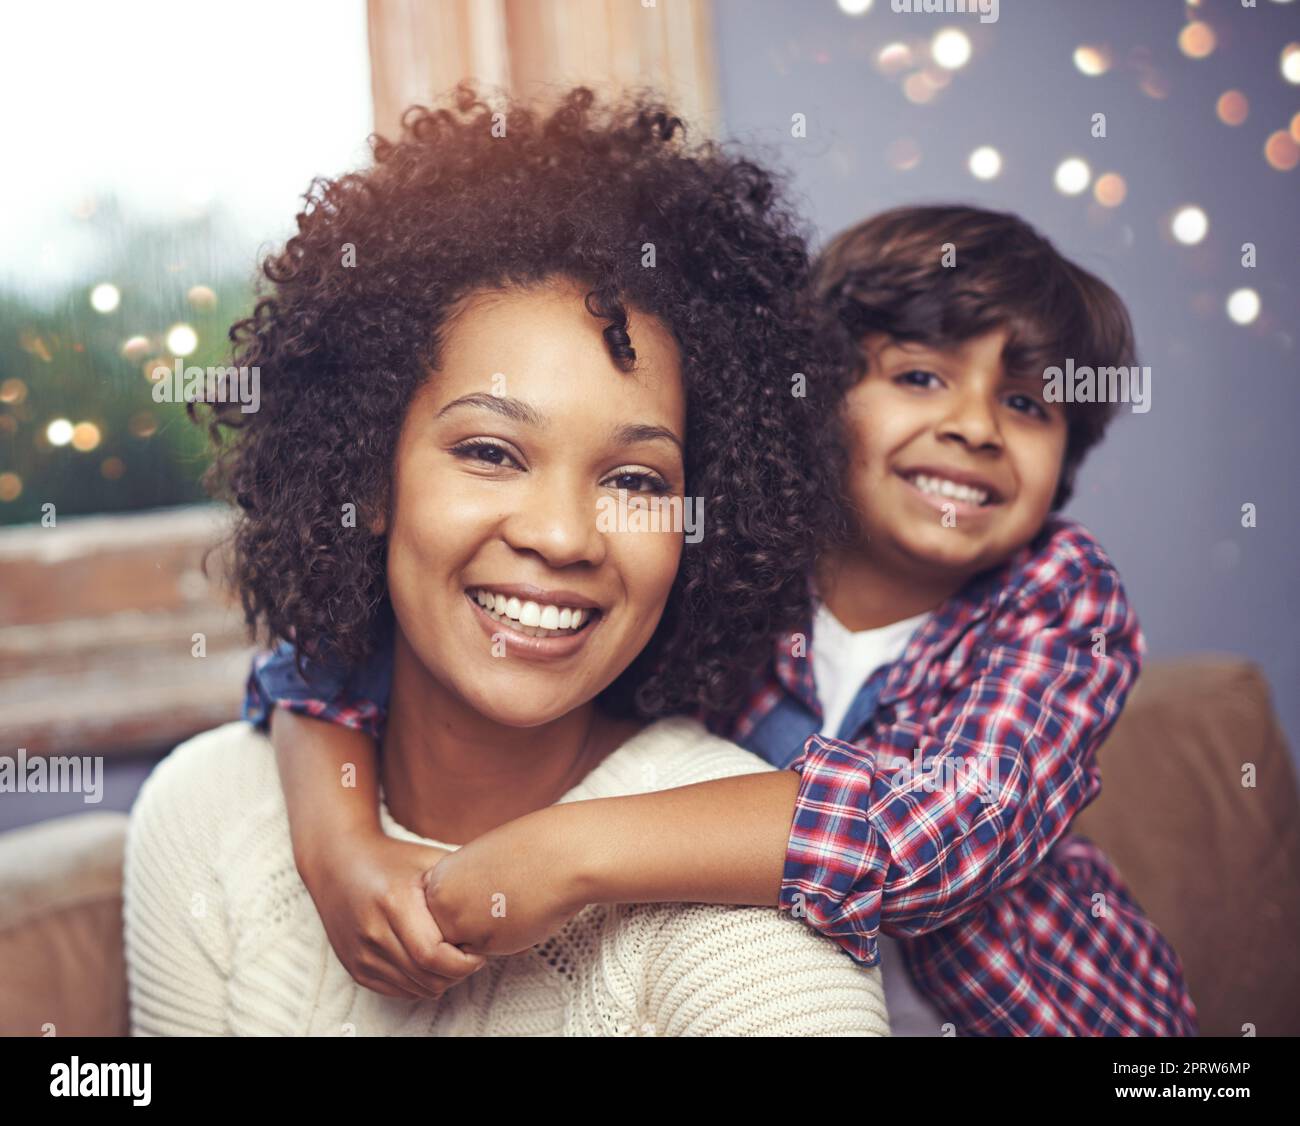 He brings so much joy to my life. Portrait of a mother and son at home. Stock Photo